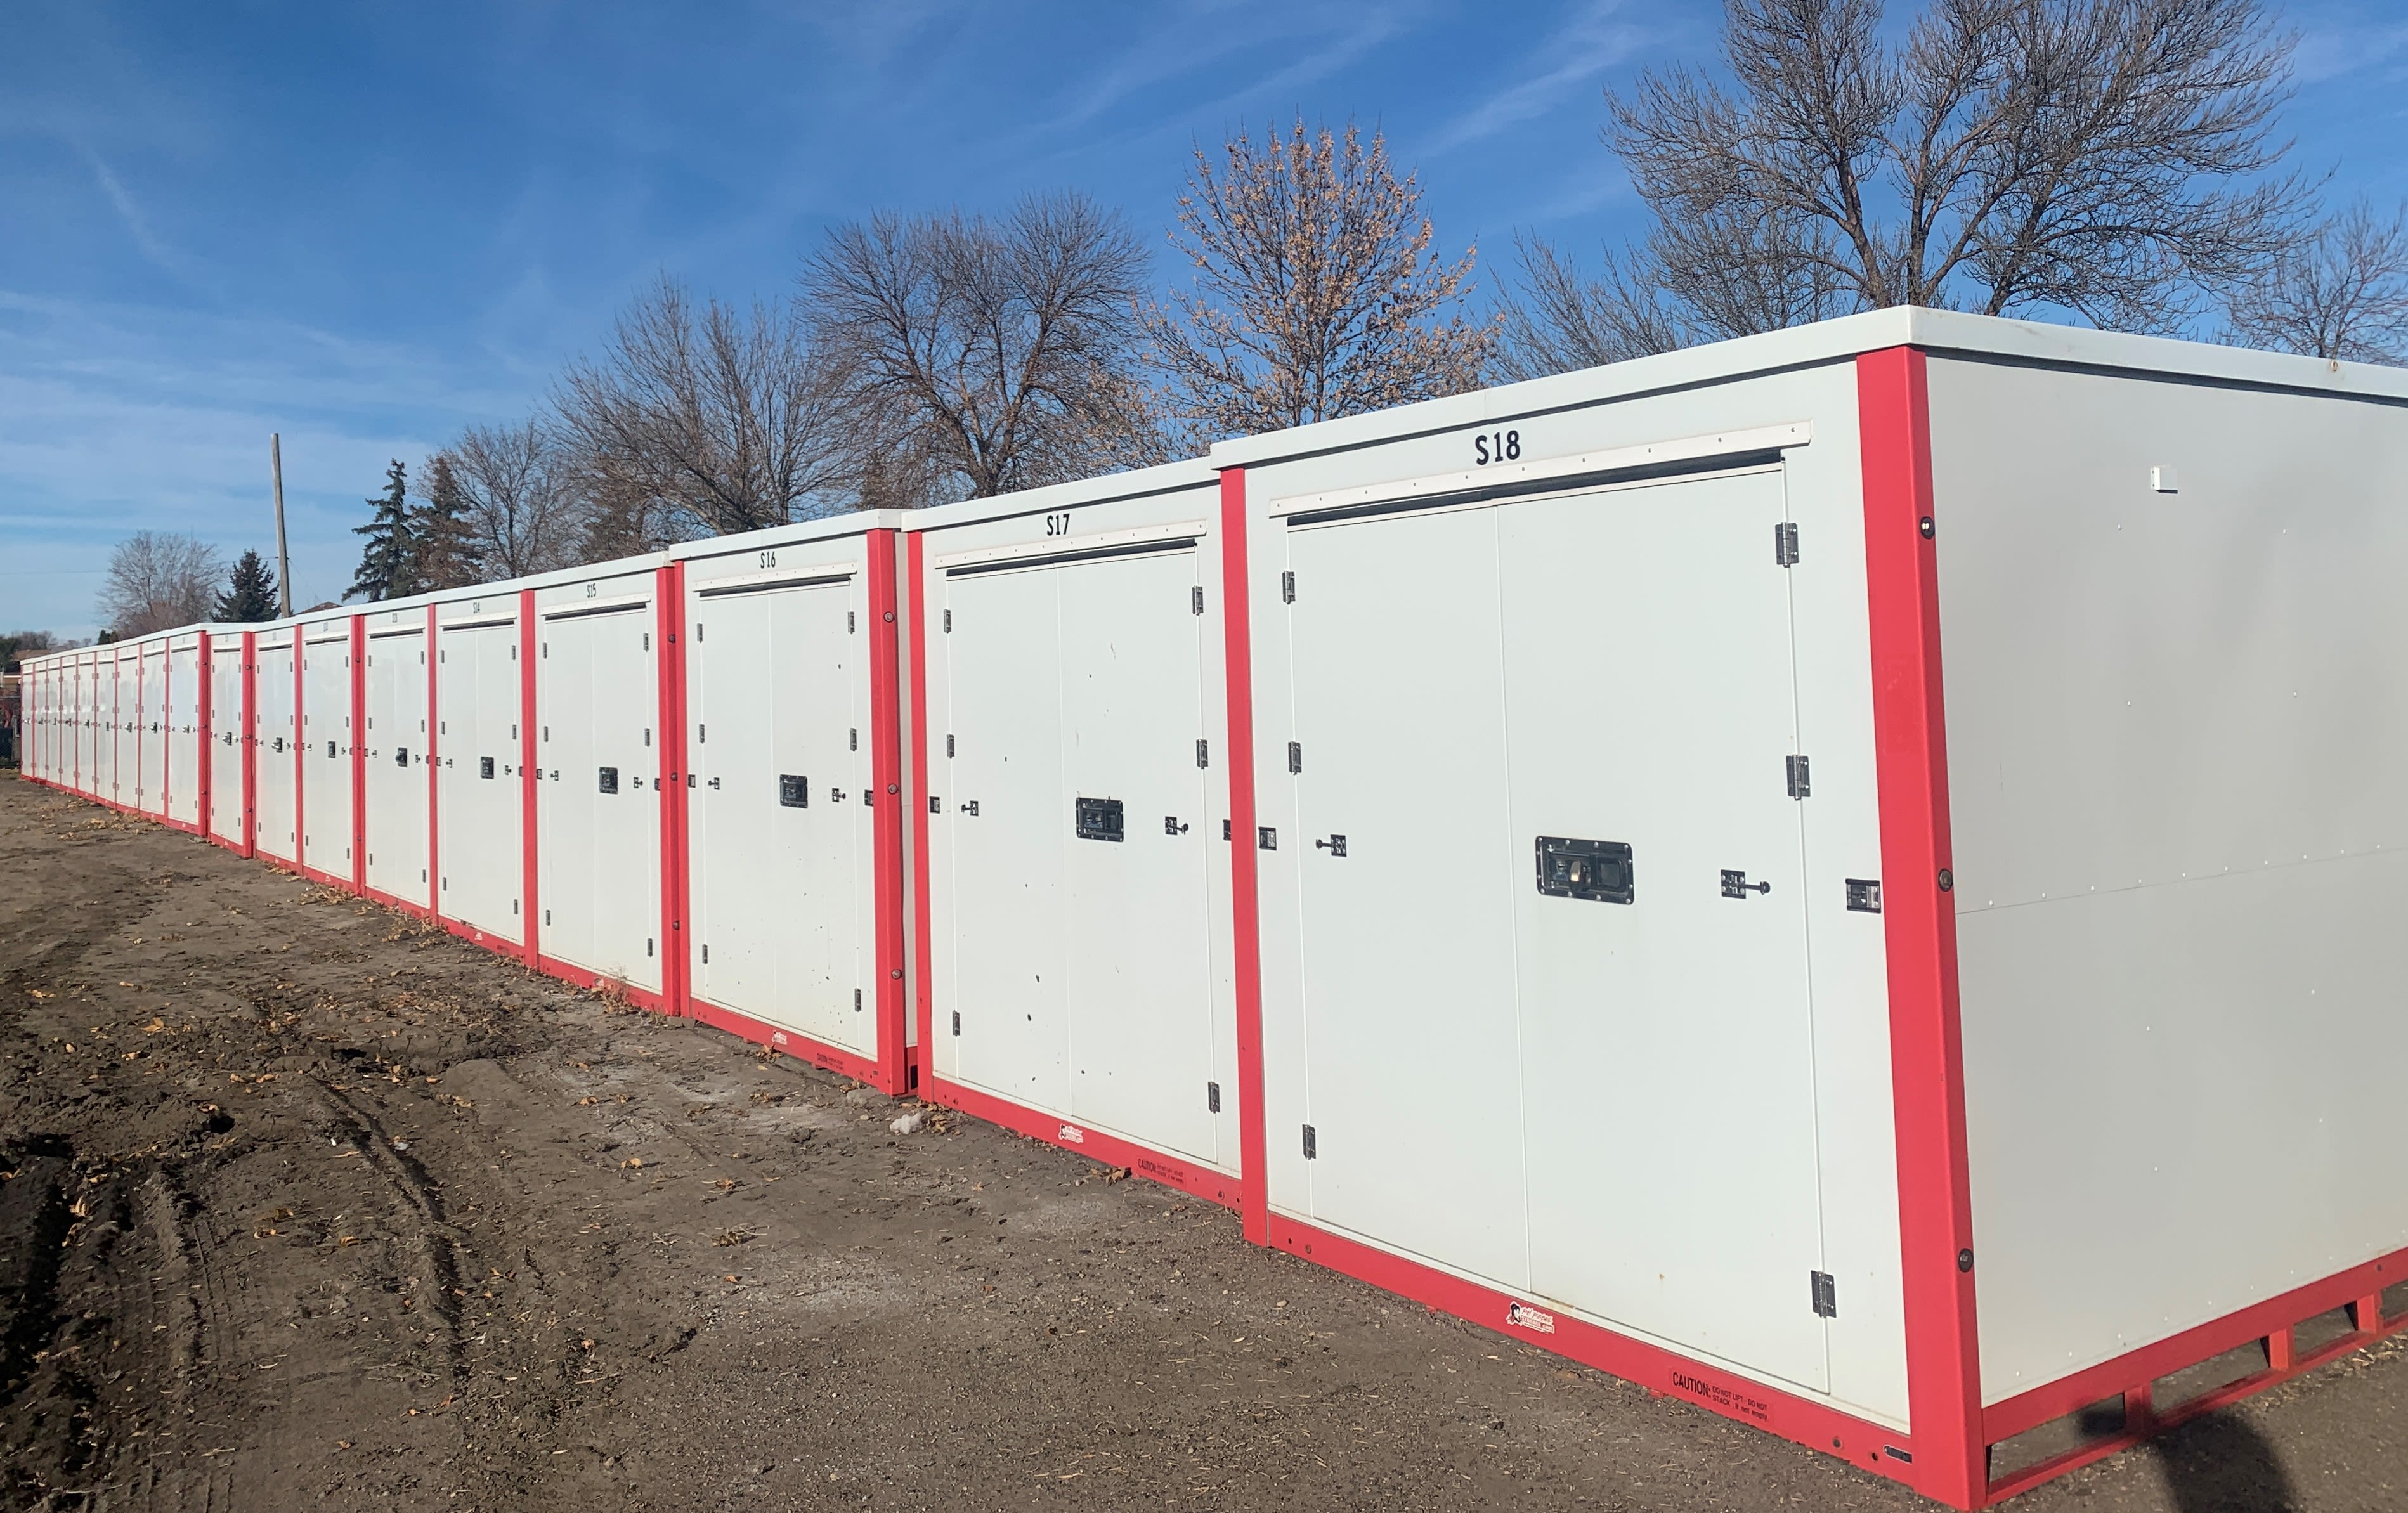 Learn more about features at KO Storage of Minot - South in Minot, North Dakota